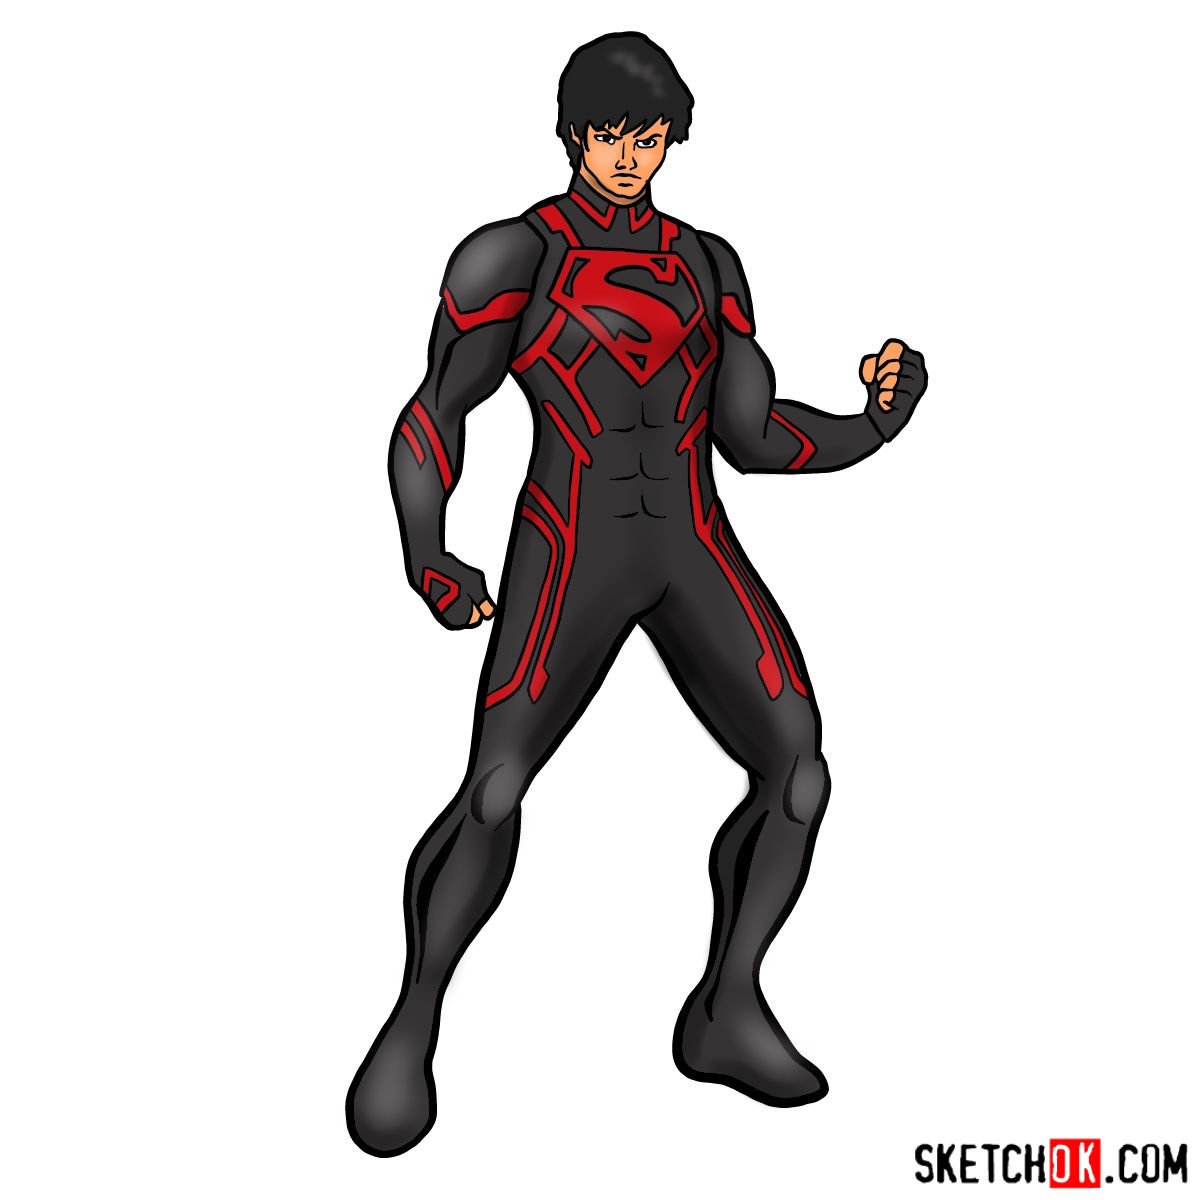 How to draw Superboy in a black suit